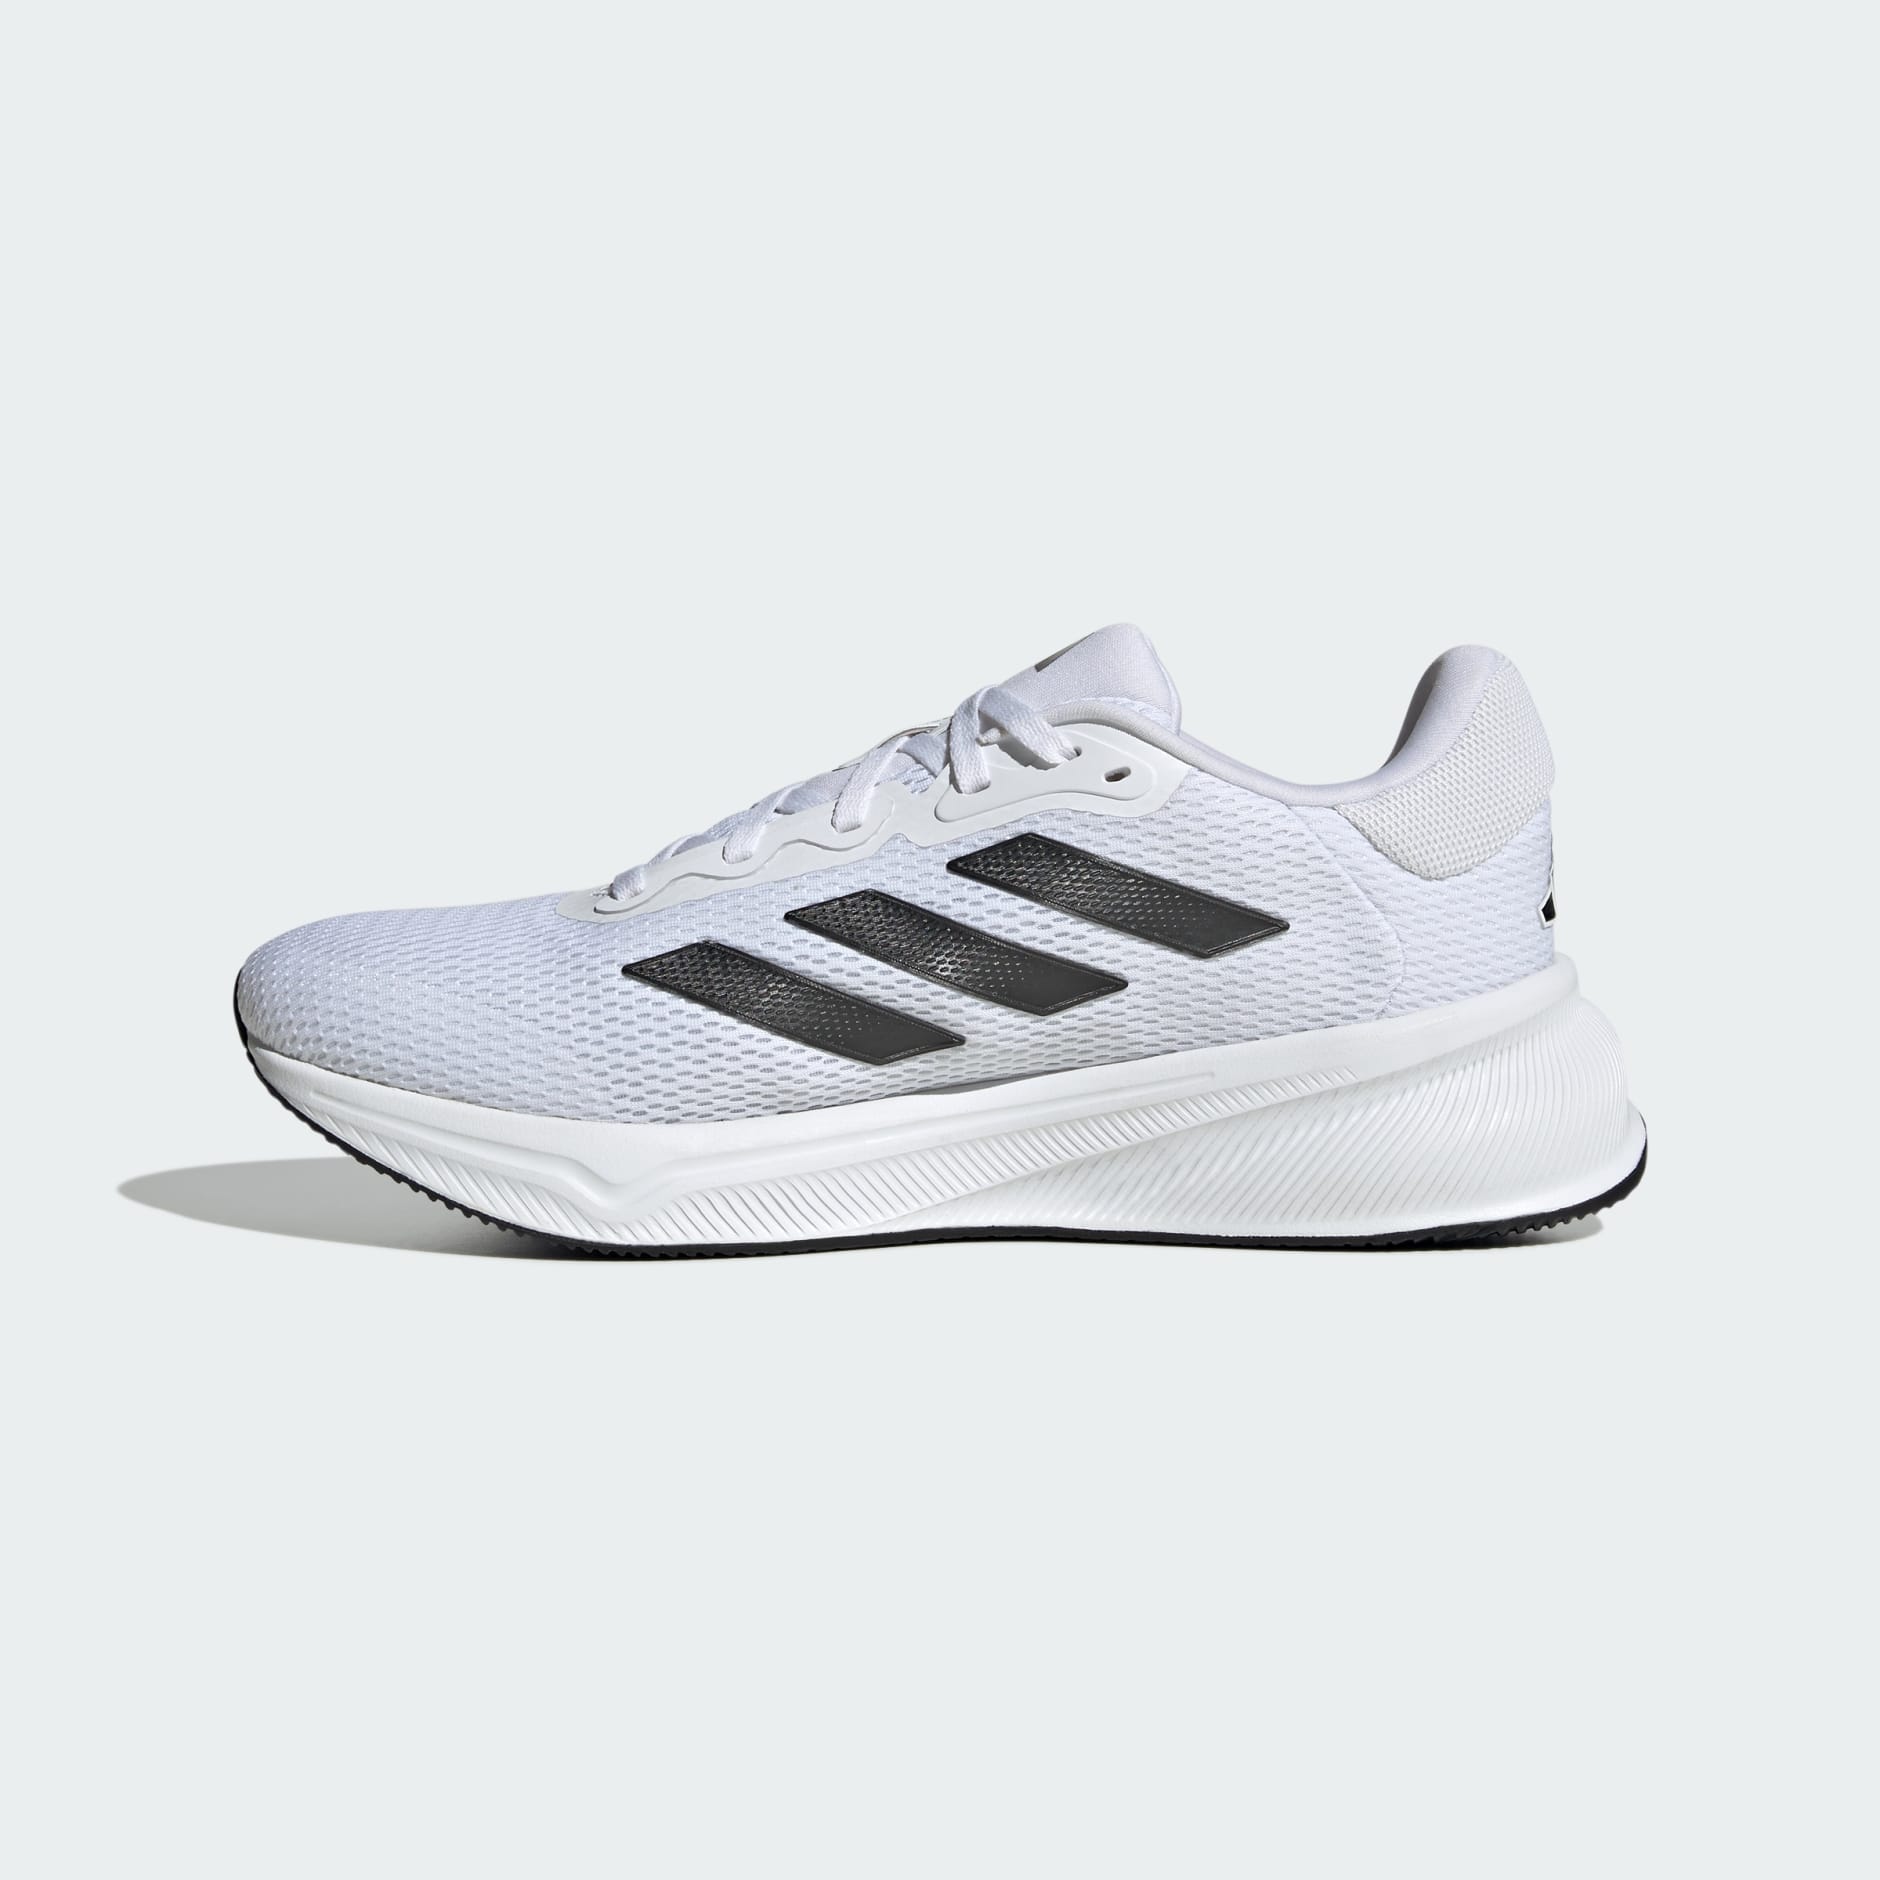 Shoes - Response Shoes - White | adidas South Africa